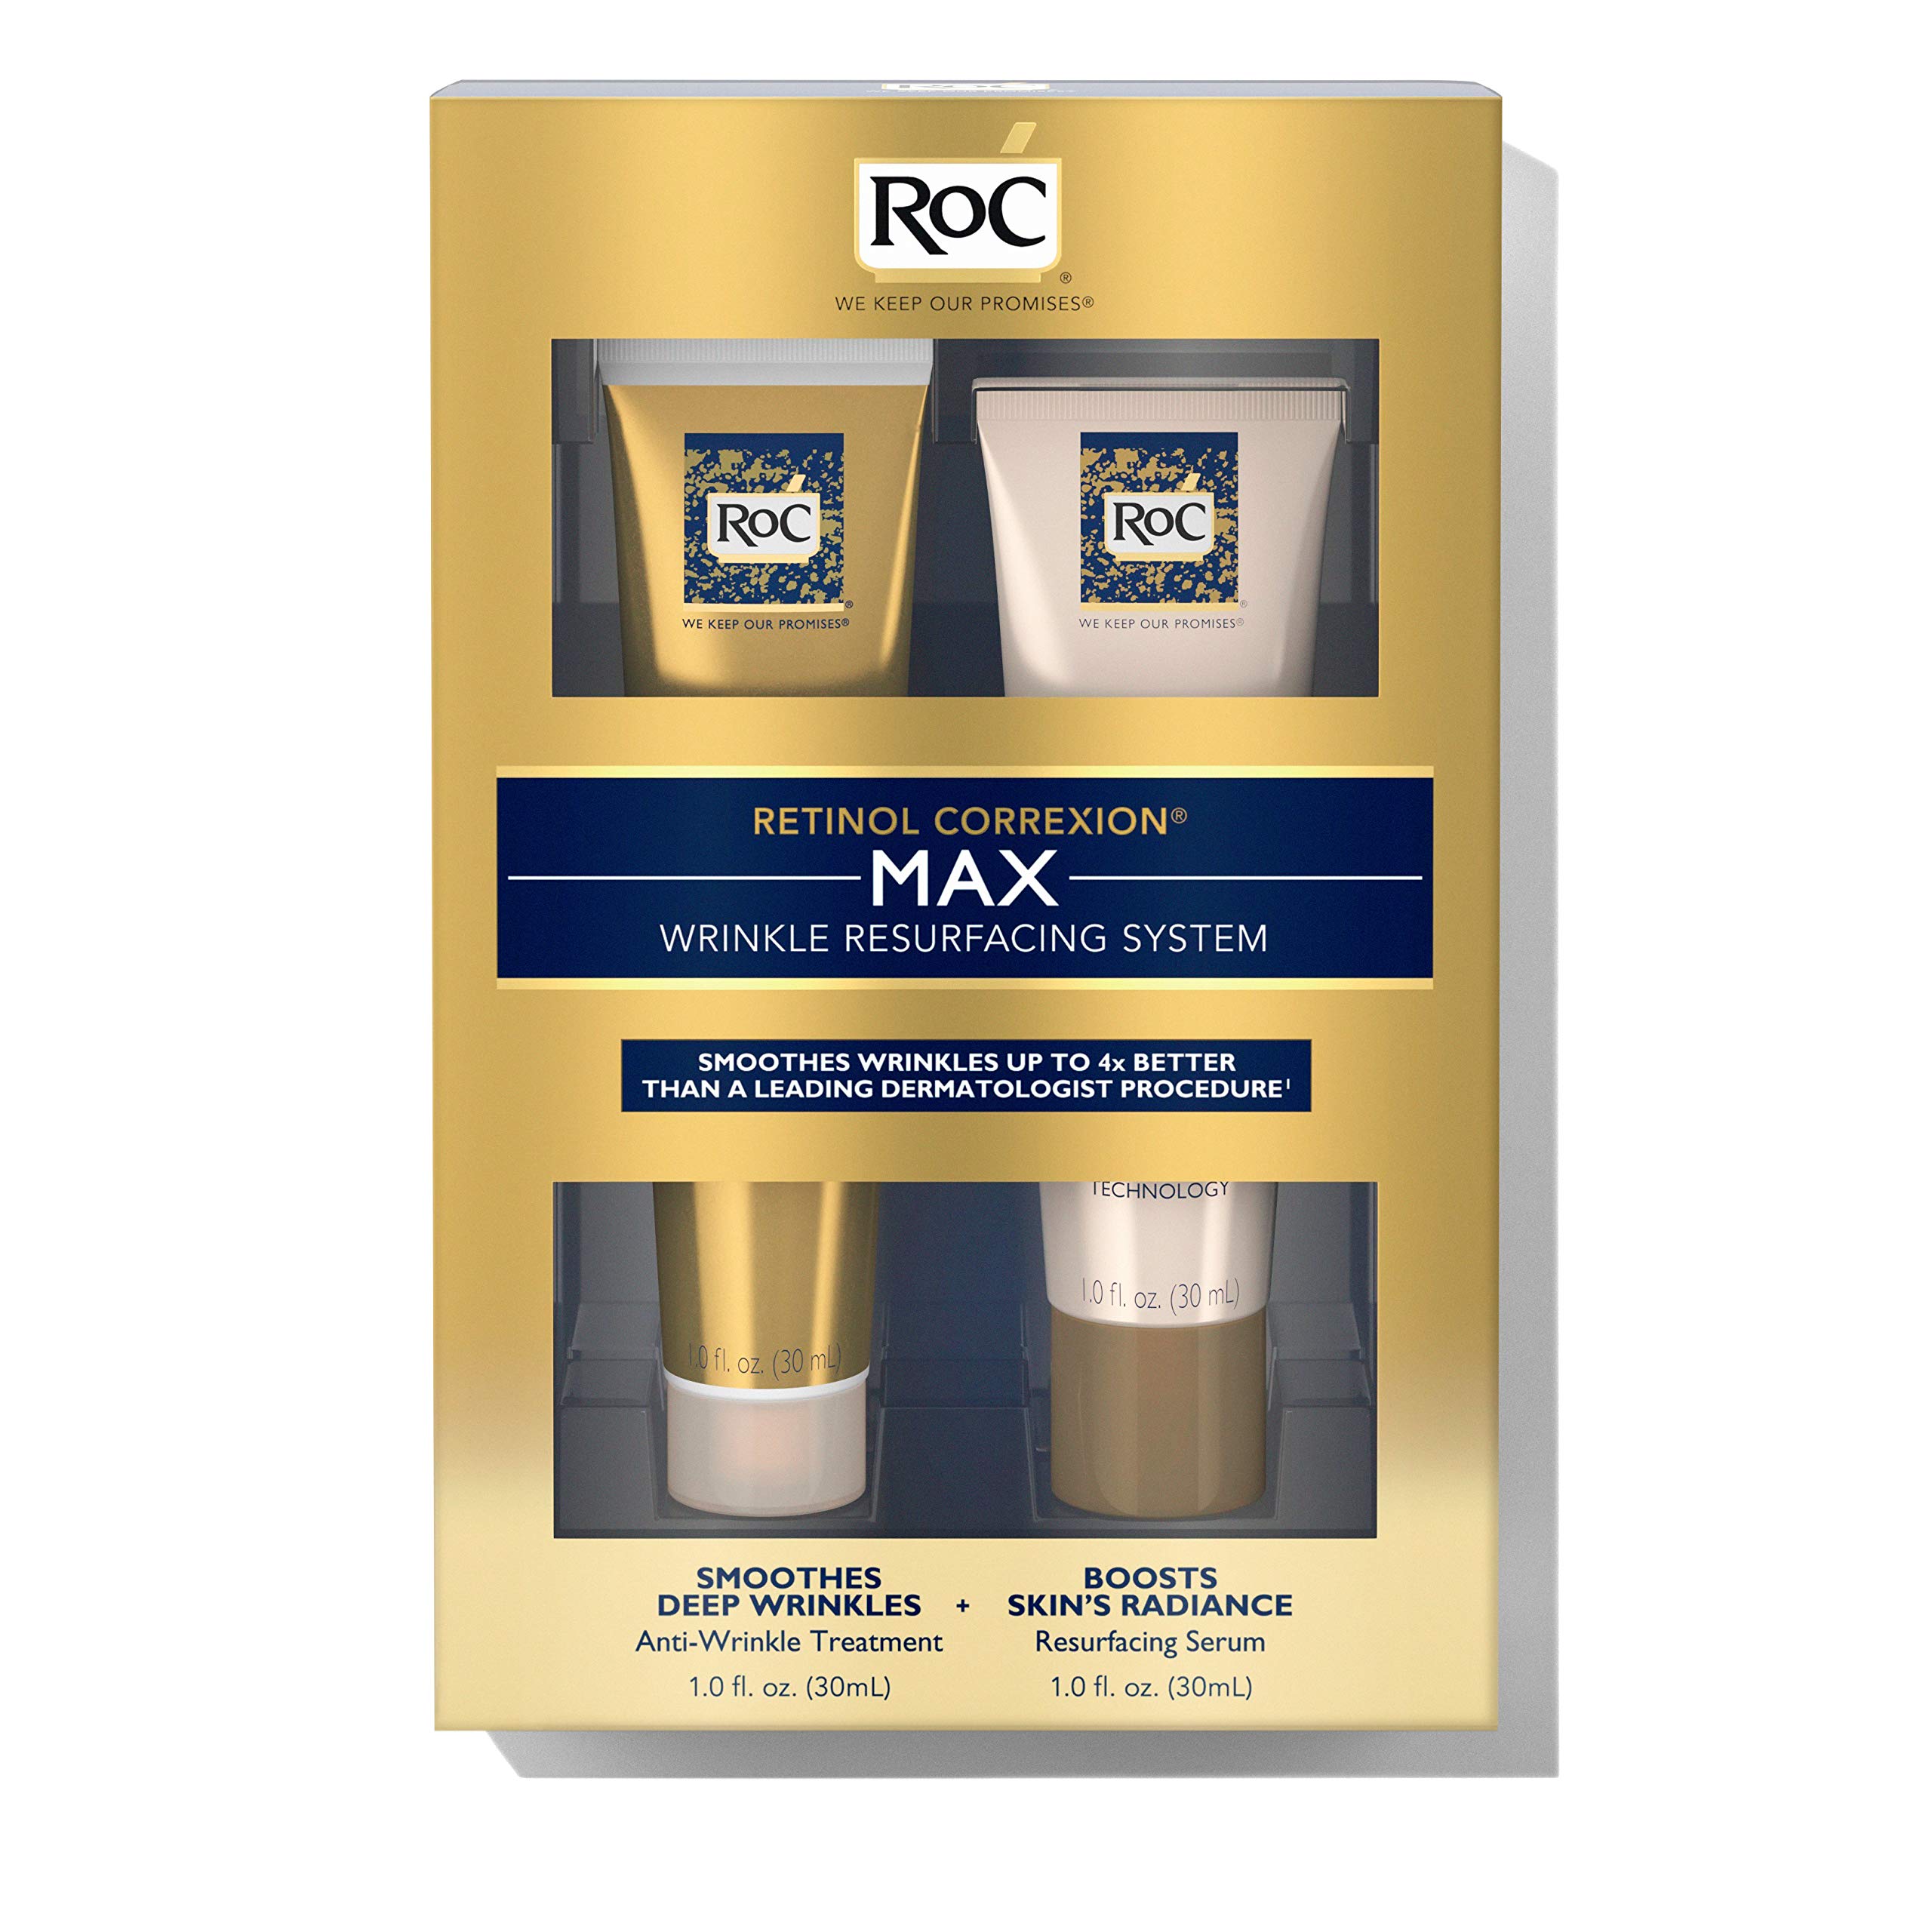 RoC Retinol Correxion Max Wrinkle Anti-Aging Skin Care System, Hyaluronic Acid Anti Wrinkle Treatment and Skin Radiance Resurfacing Serum for Fine Lines, Dark Spots, Acne Scars, Set of 2